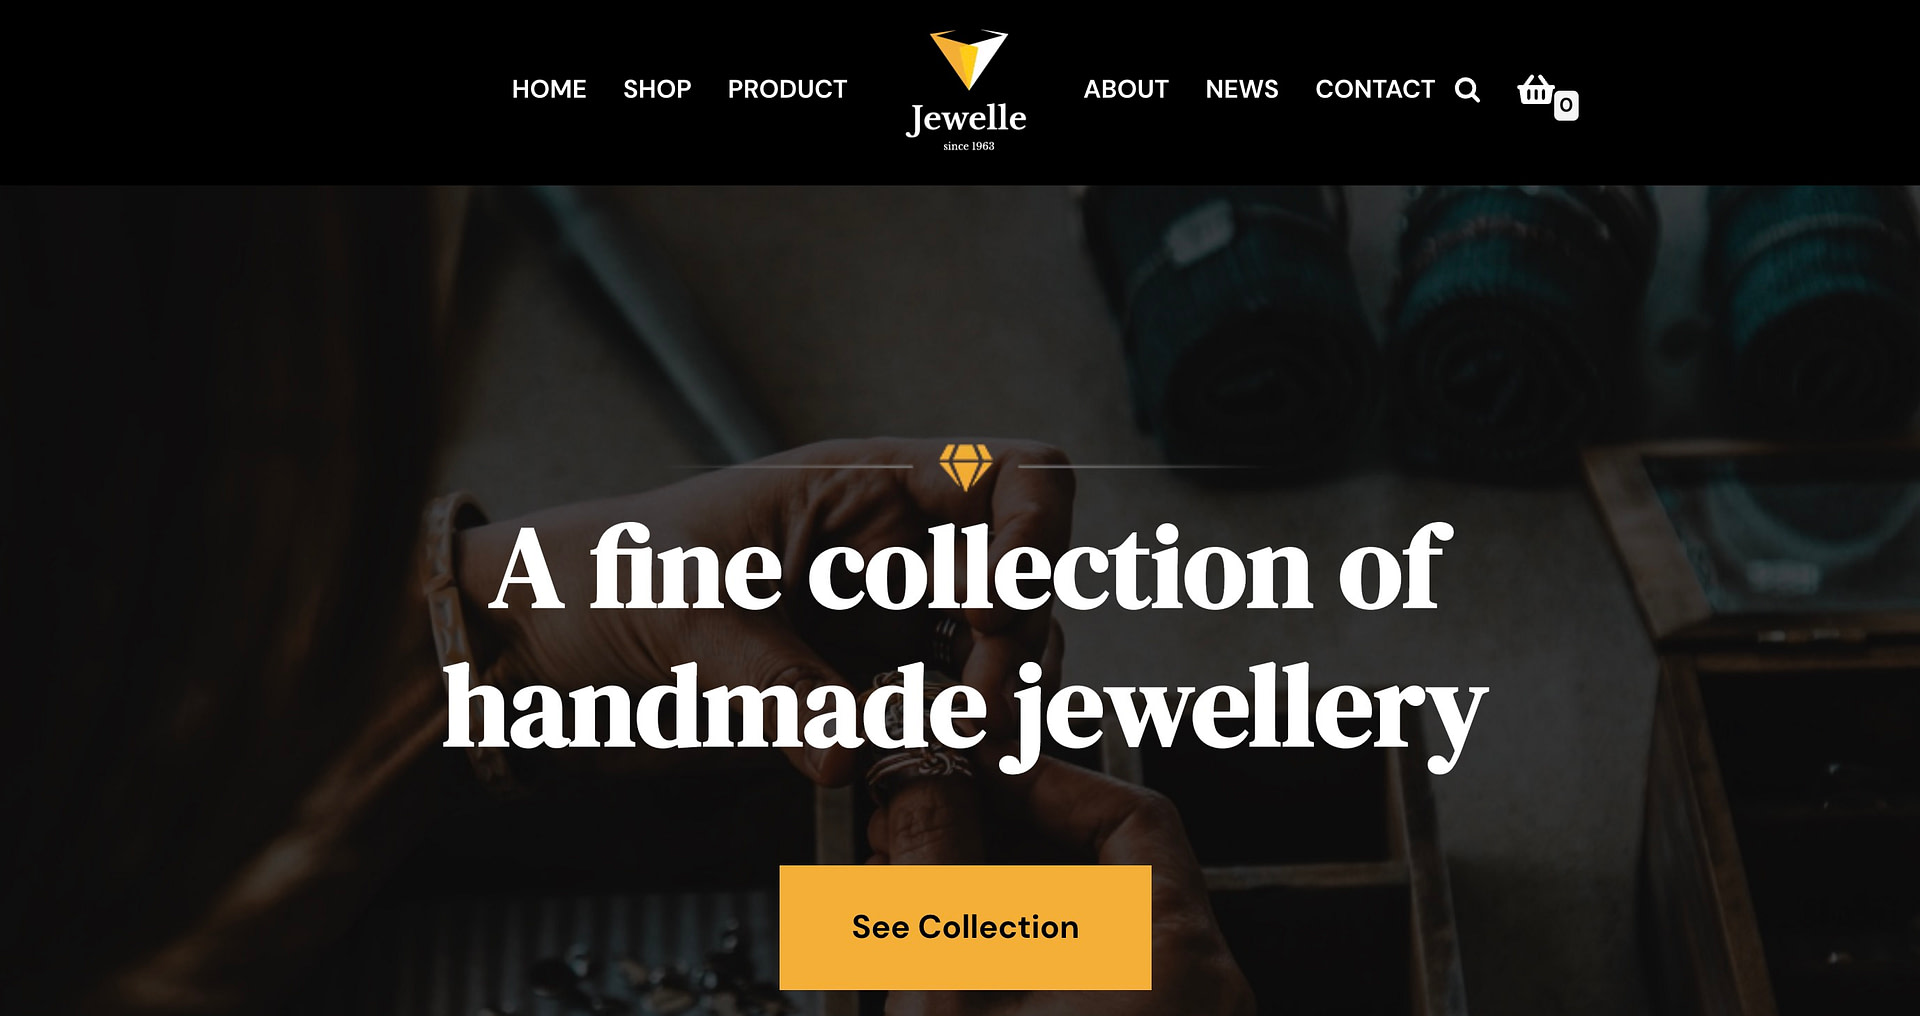 The Neve online jewelry shop theme